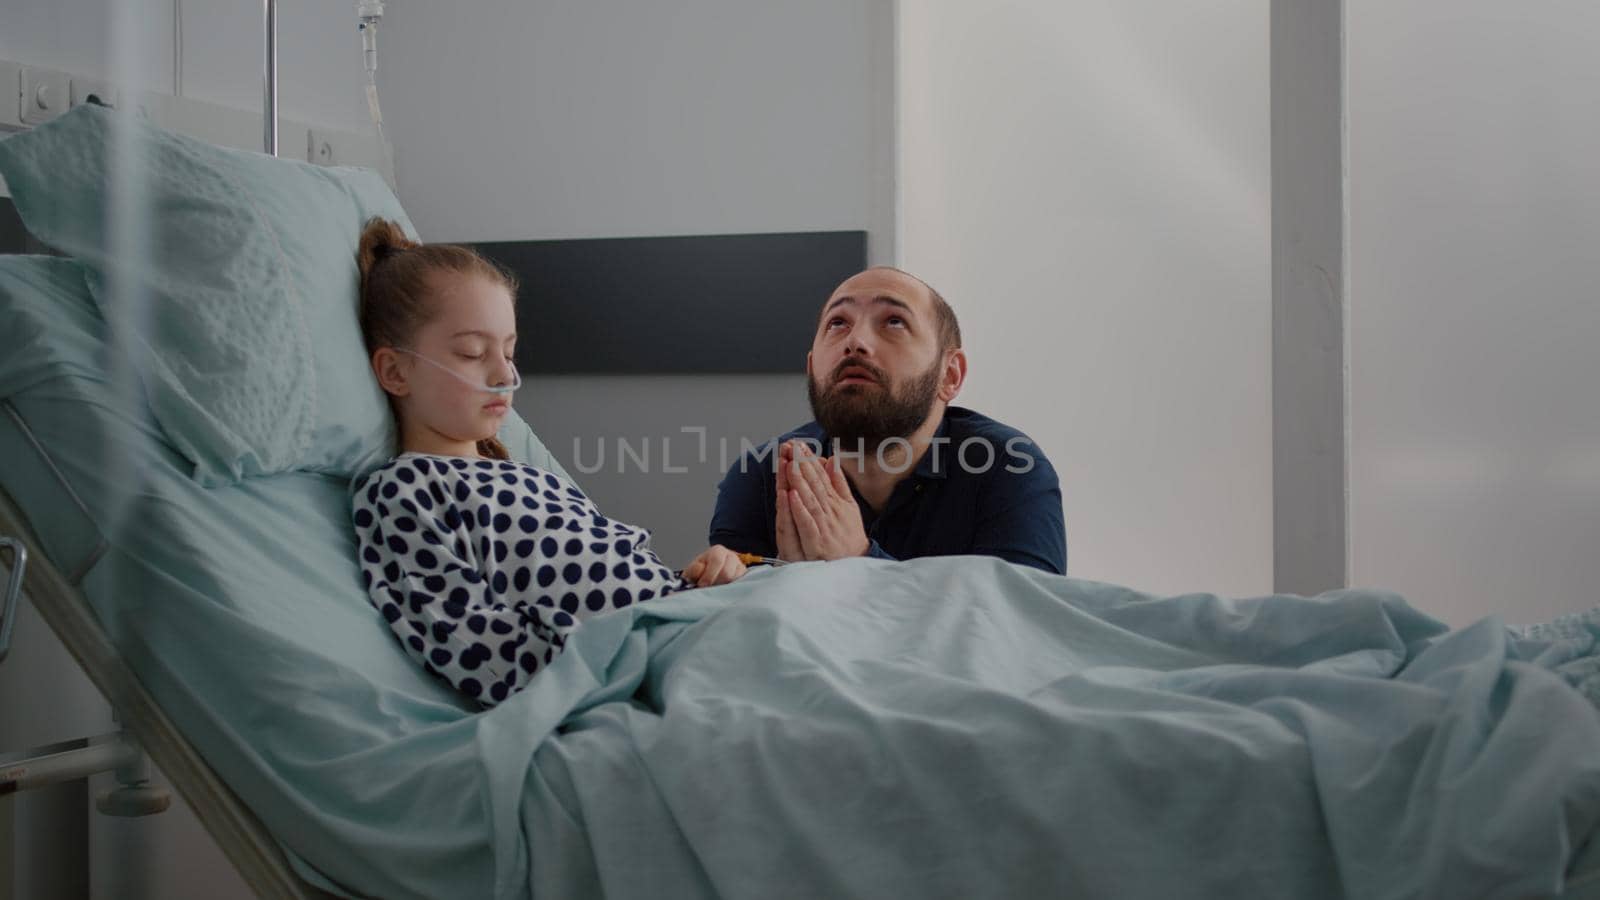 Sick girl daughter sleeping after surgery recovery while worried father praying for kid healthcare by DCStudio